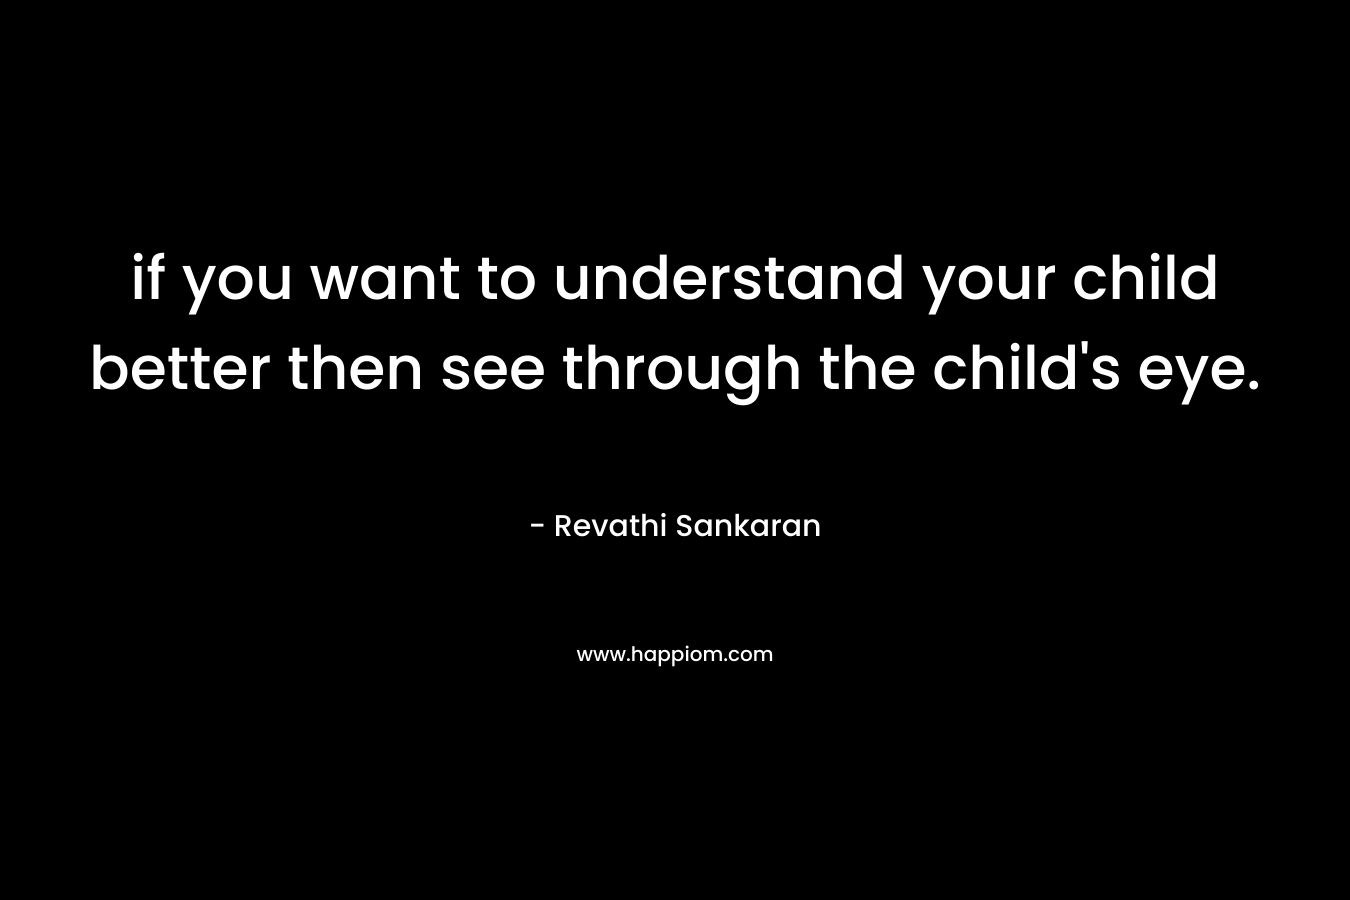 if you want to understand your child better then see through the child’s eye. – Revathi Sankaran